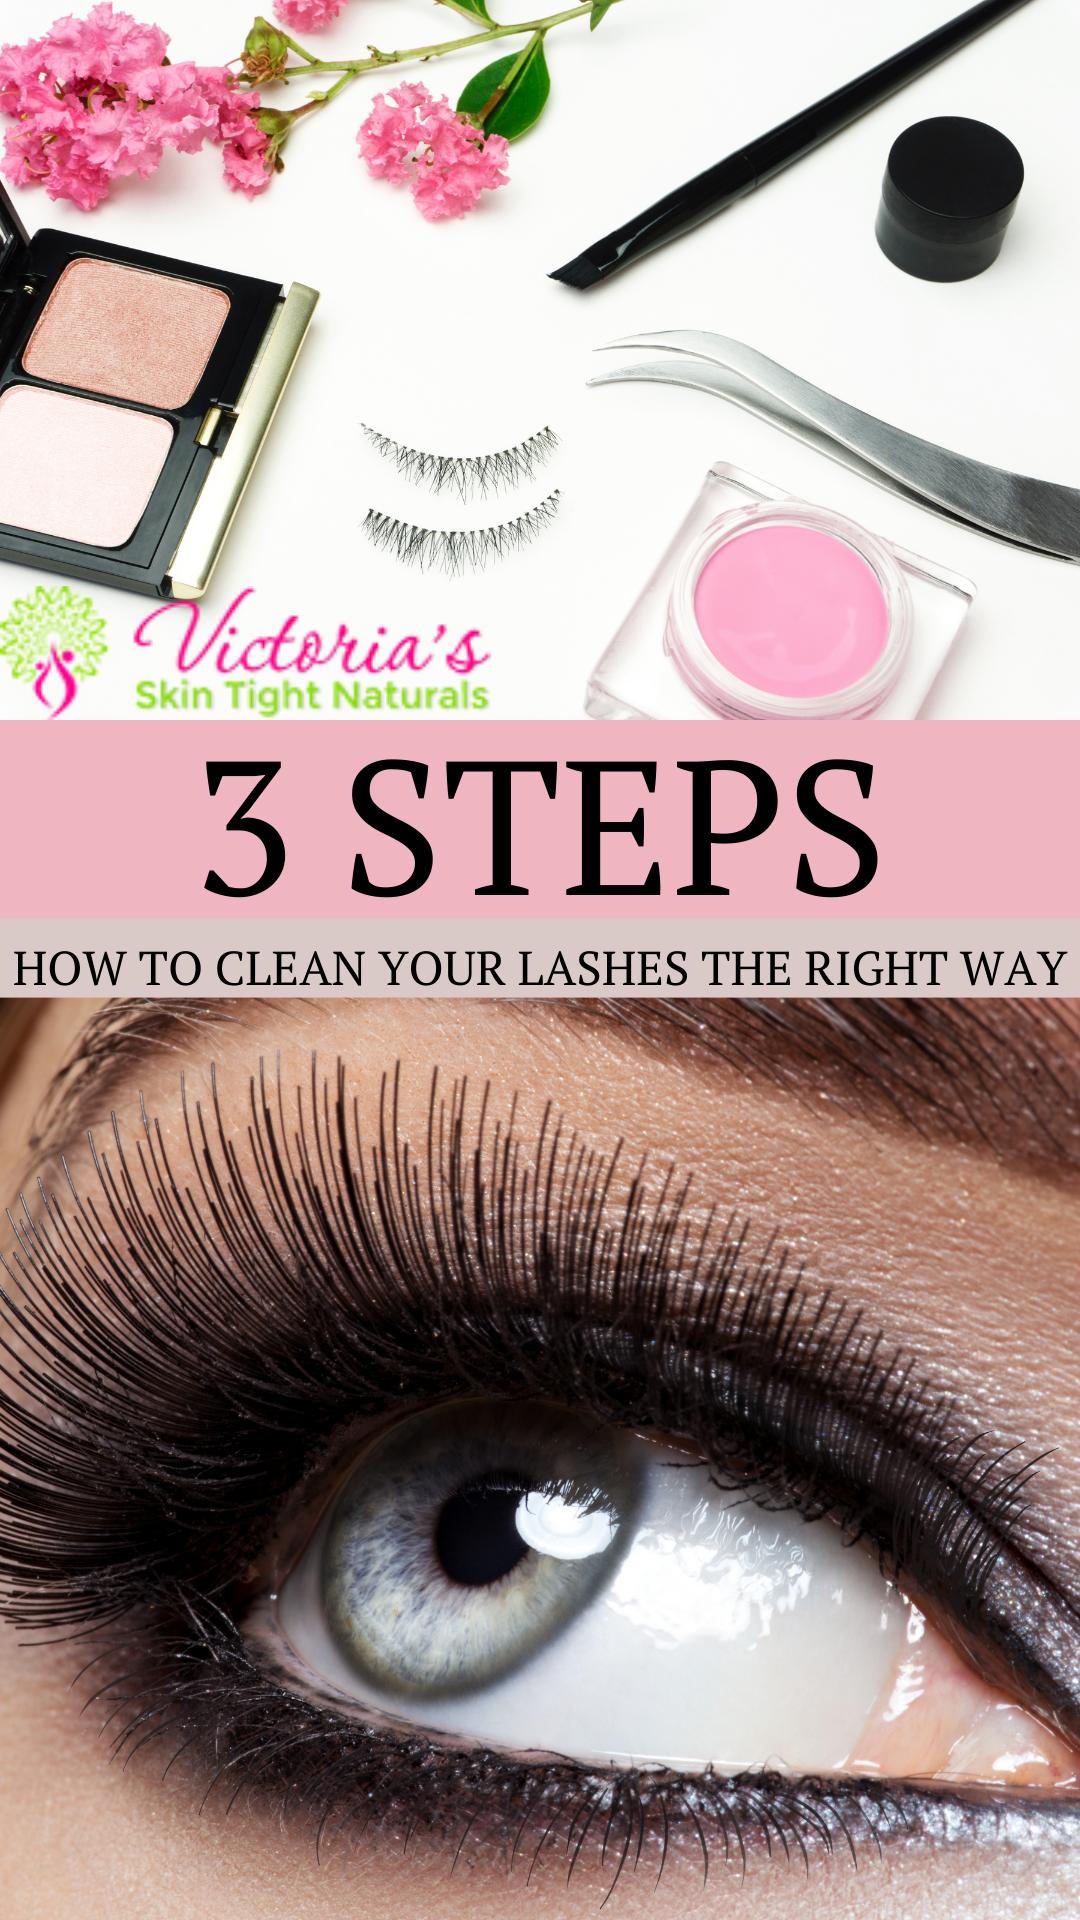 How To Clean Your Eyelashes